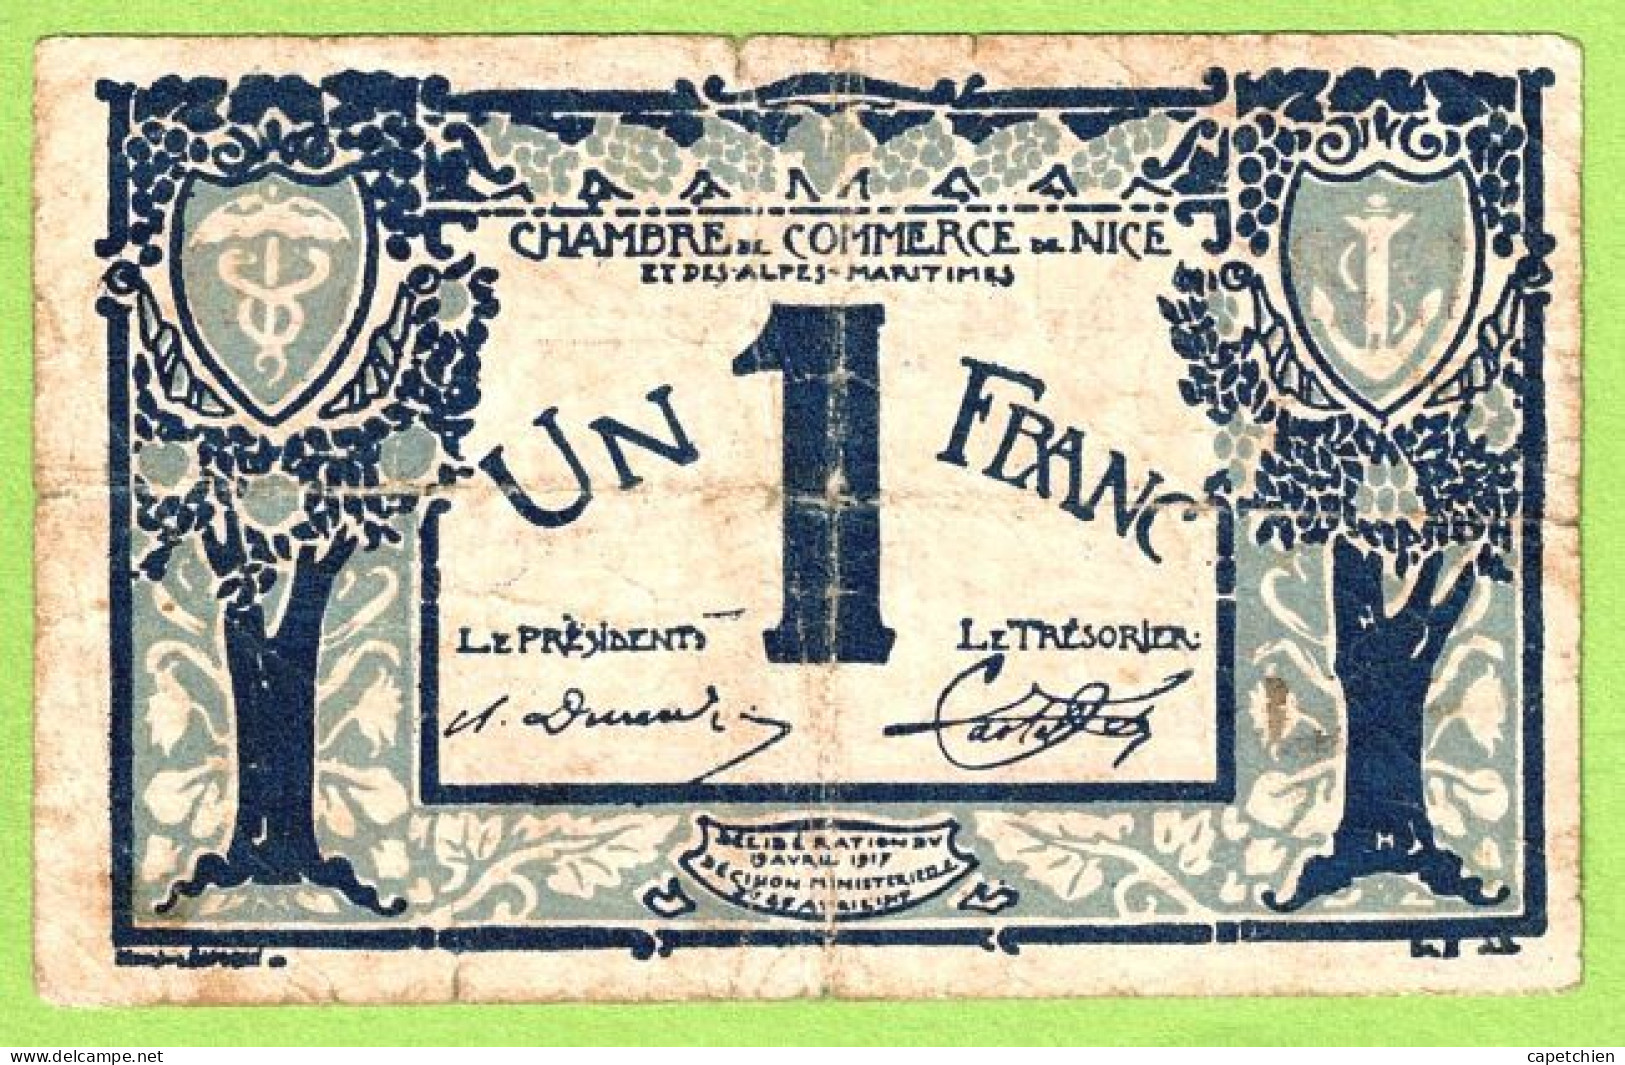 FRANCE / CHAMBRE De COMMERCE / NICE - ALPES MARITIMES / 1 FRANC / 1917-1919 SURCHARGE ROUGE 1920-1921 / N° 20497 / S 64 - Chamber Of Commerce